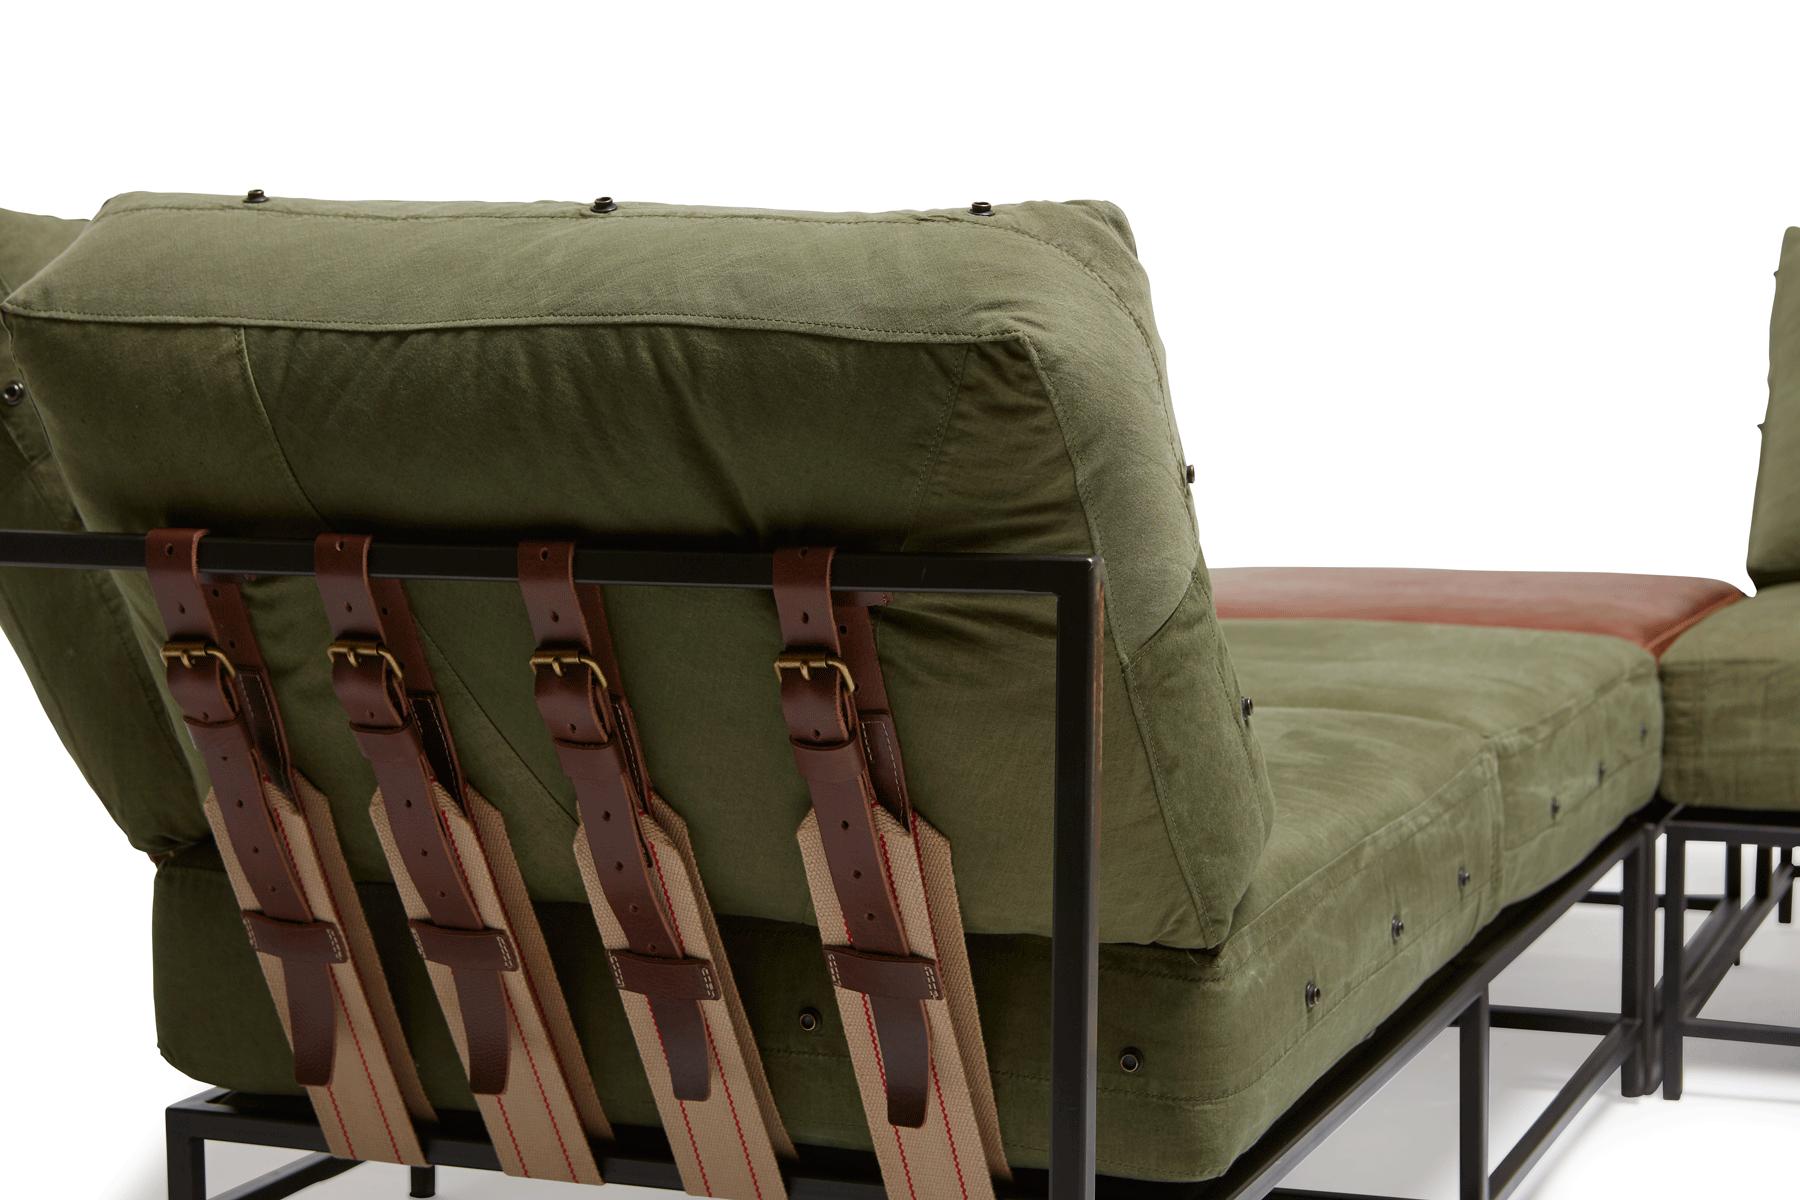 Our sectionals are great ways to customize your space and create the ultimate lounge spaces. 

Since first designing Inheritance Collection, Stephen Kenn has been inspired by the inherent history in vintage military-issue materials. Each piece of